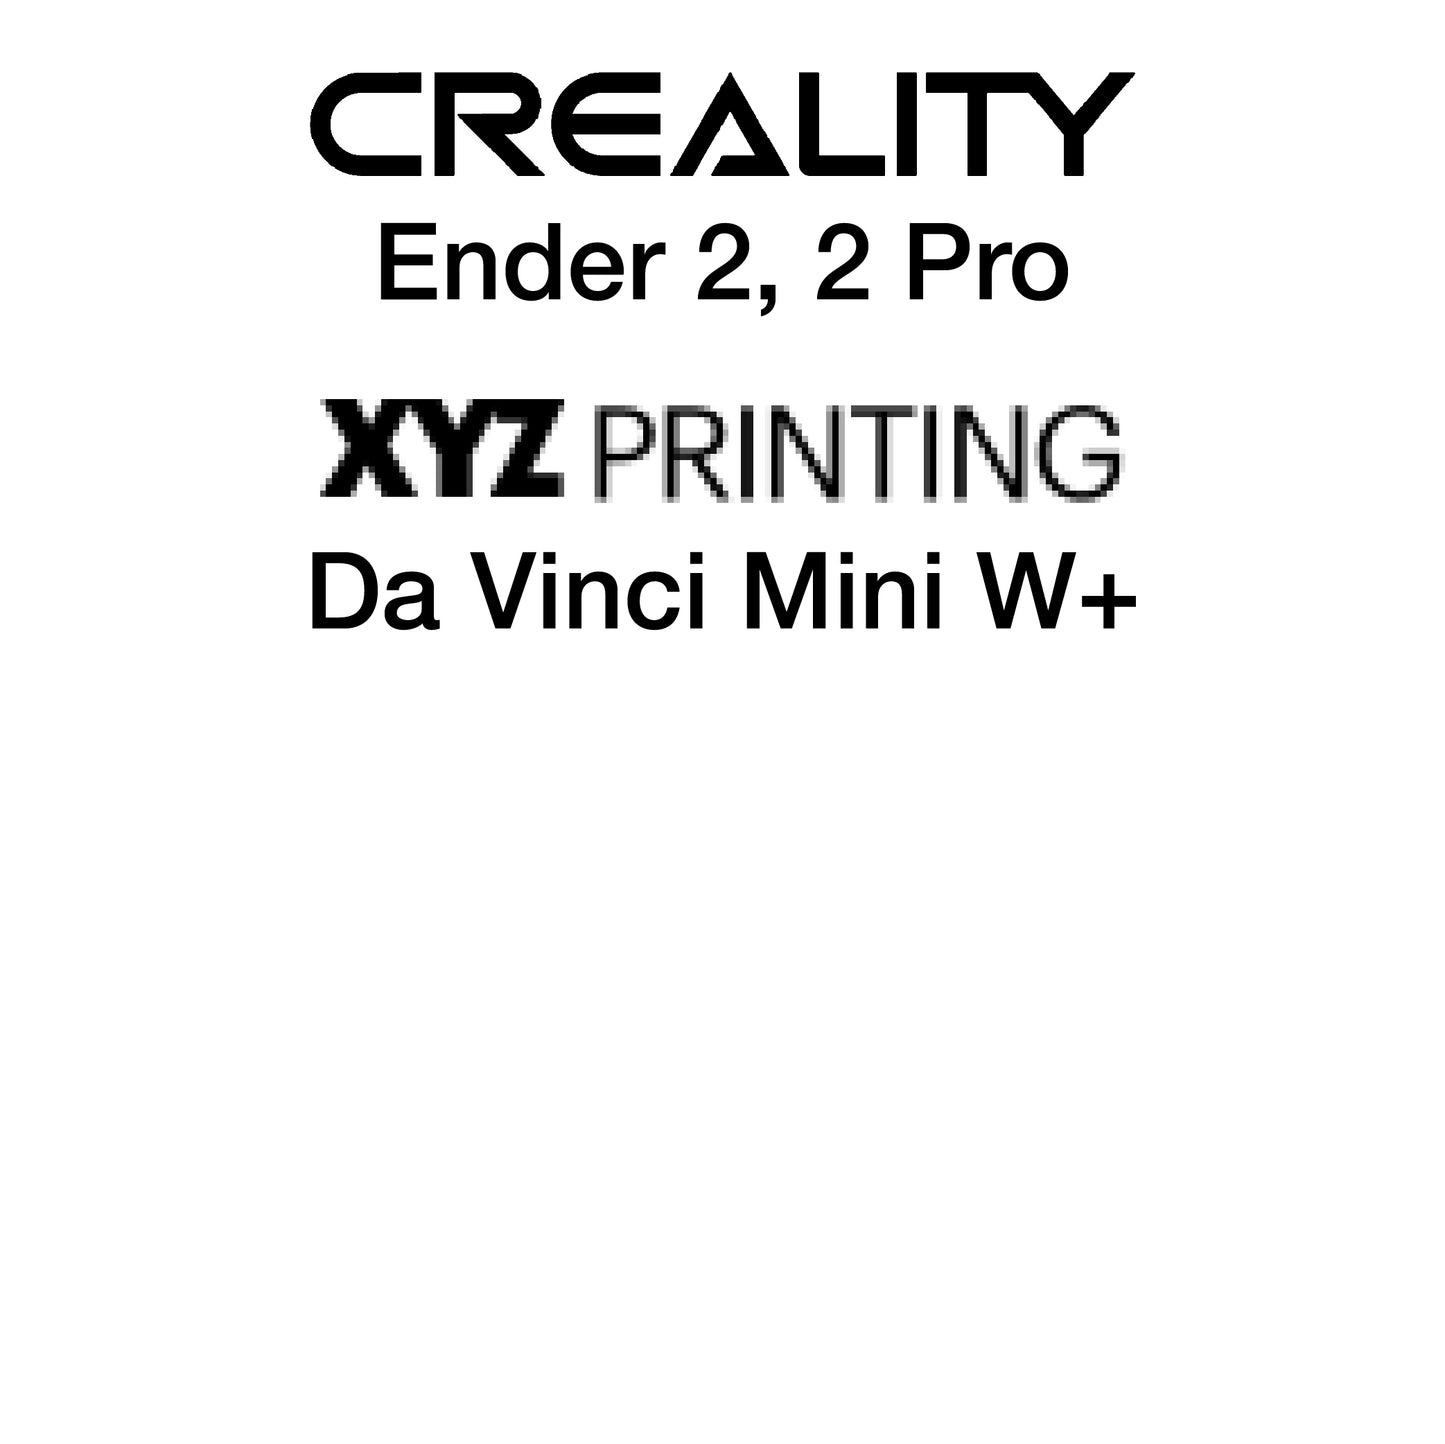 Kit with PEX - Creality Ender 2 and Creality Ender 2 Pro - 165 x 165